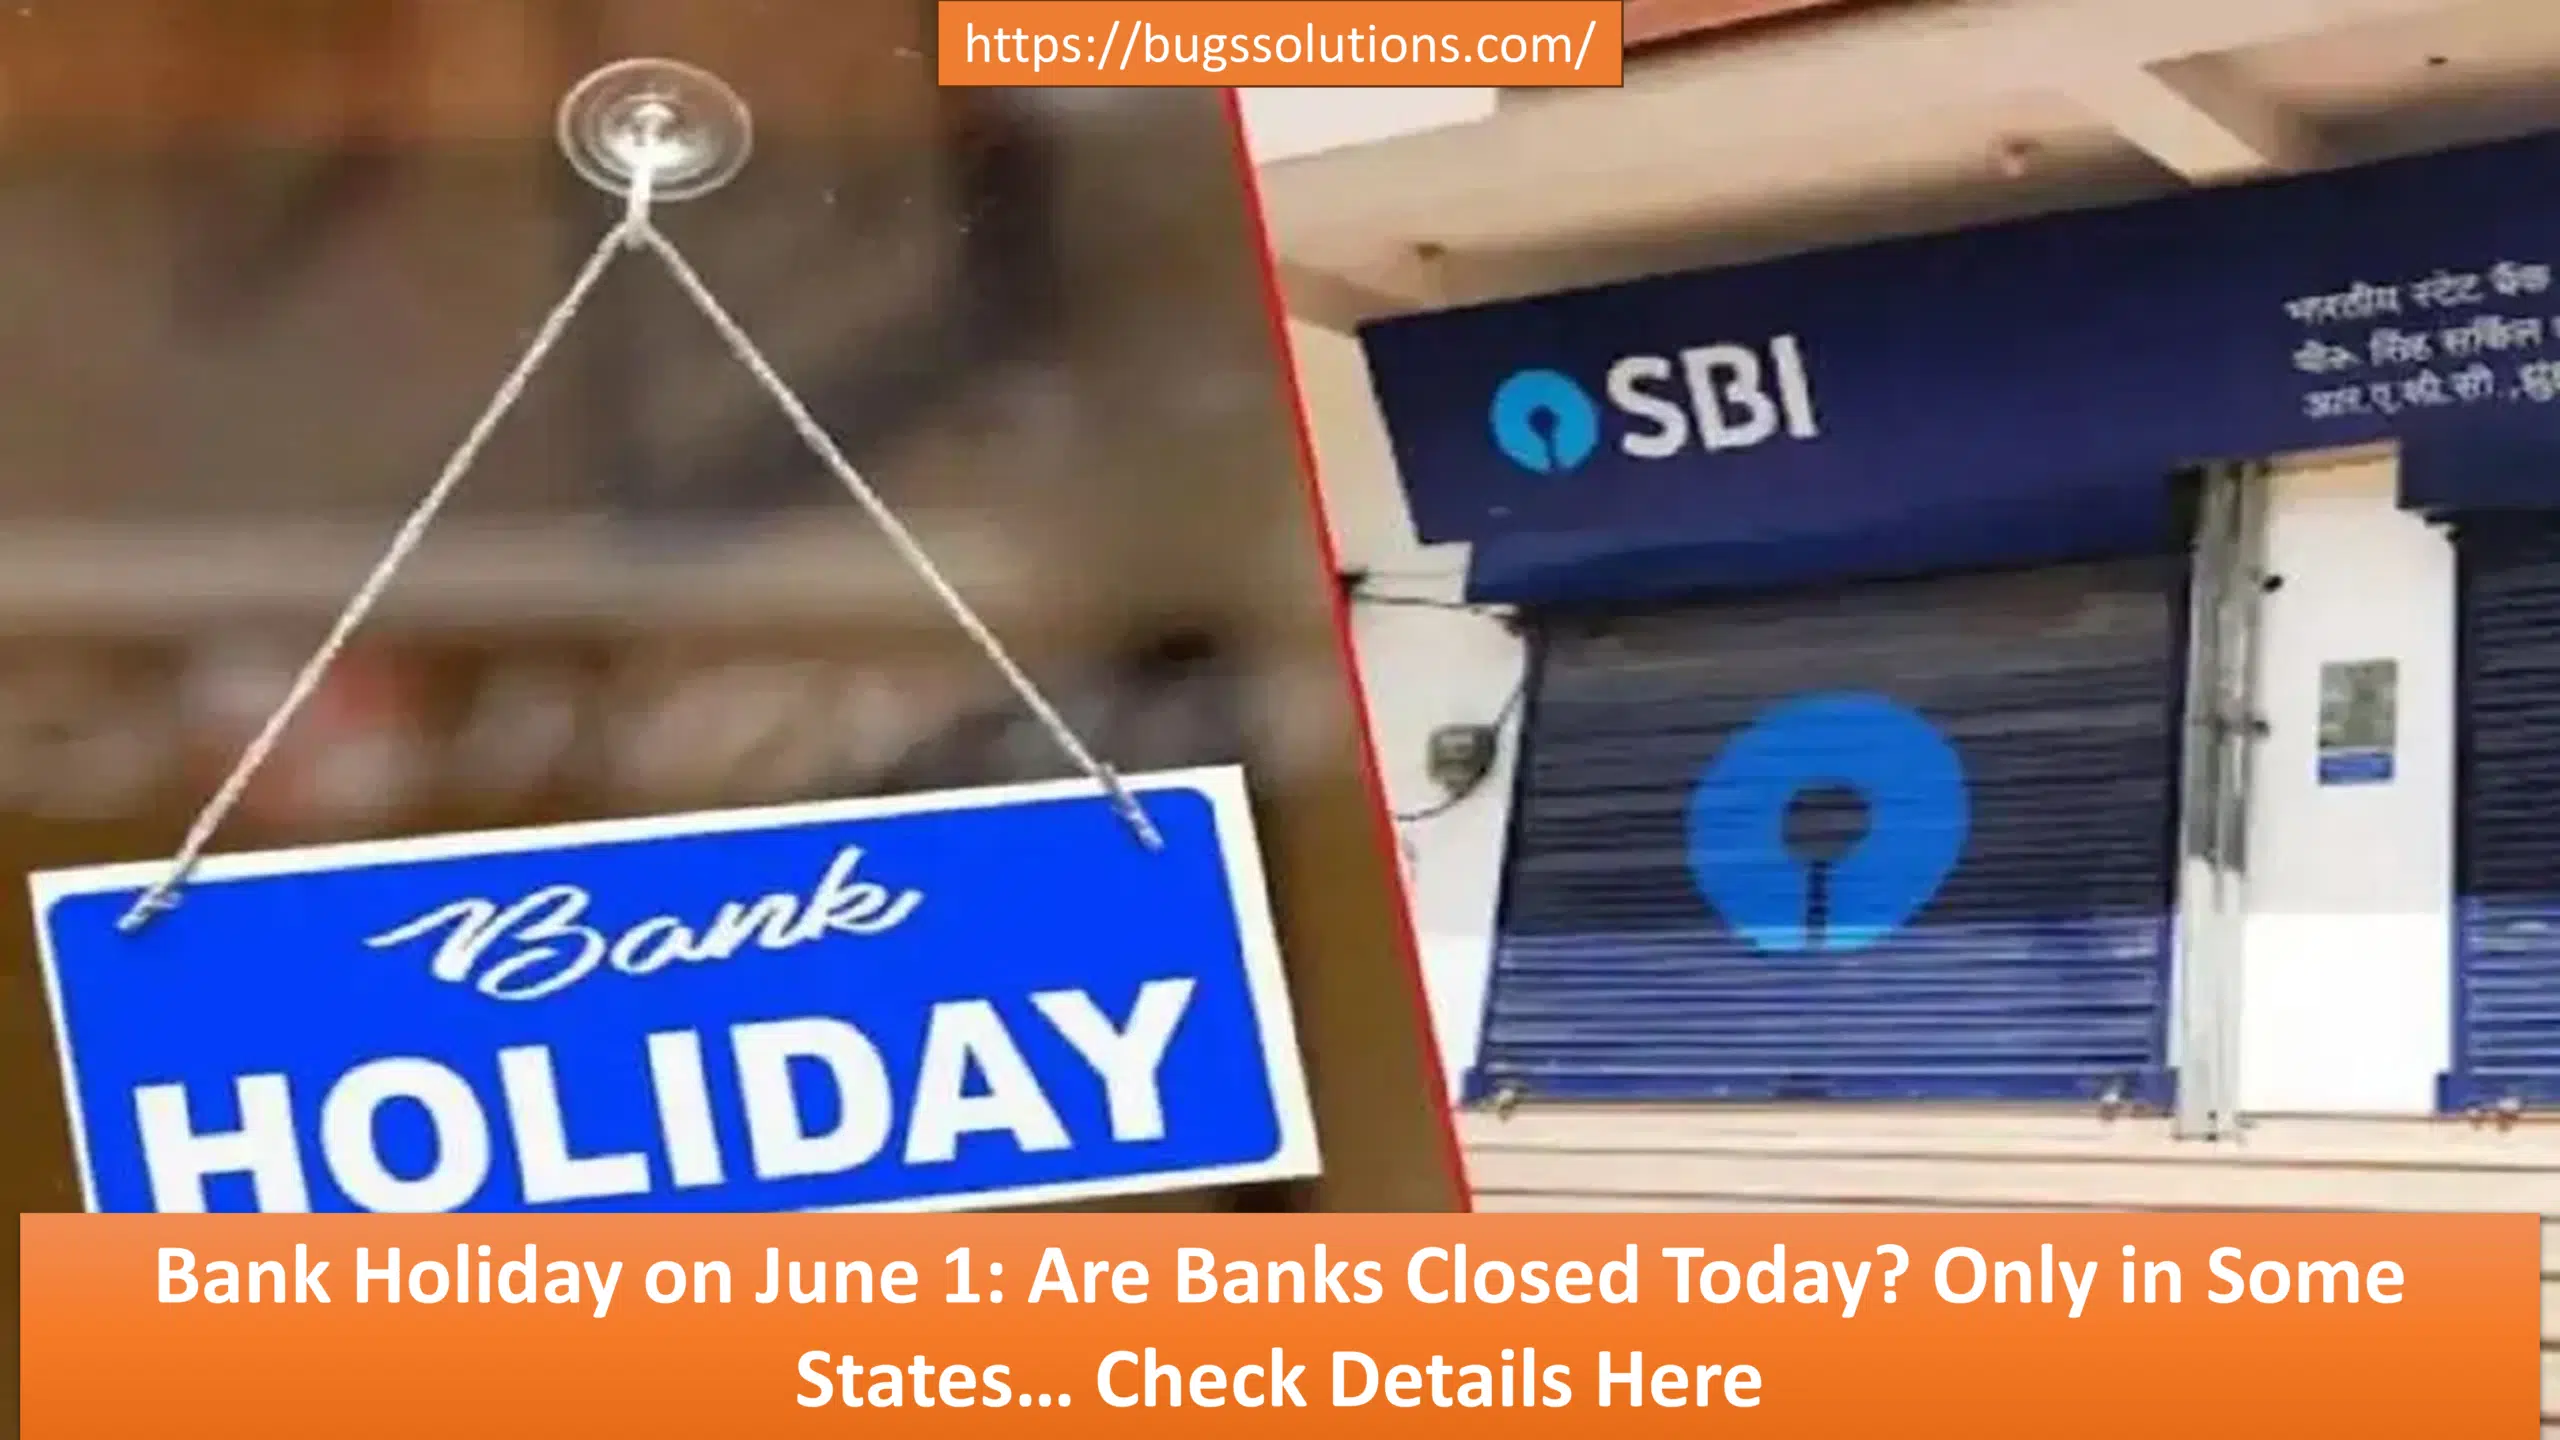 Bank Holiday on June 1: Are Banks Closed Today? Only in Some States… Check Details Here